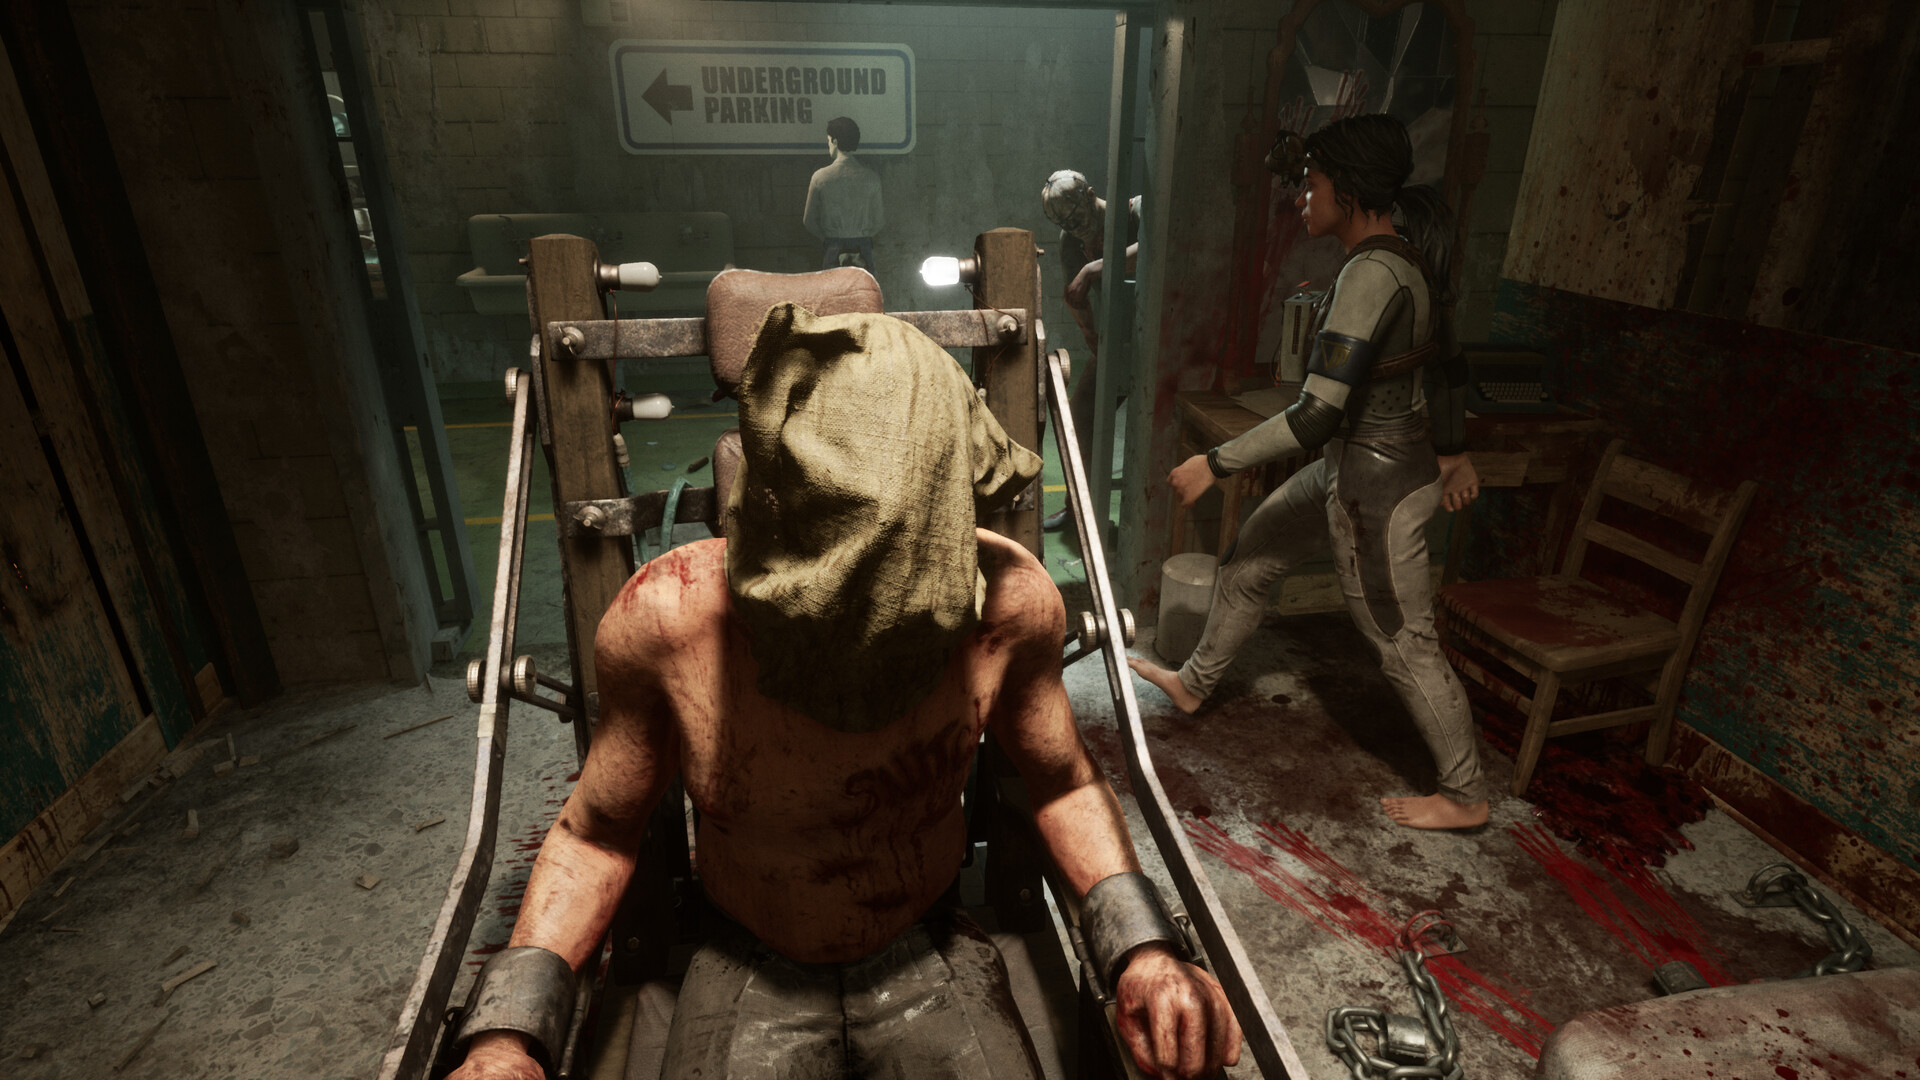 The Outlast Trials launches in Early Access on May 18